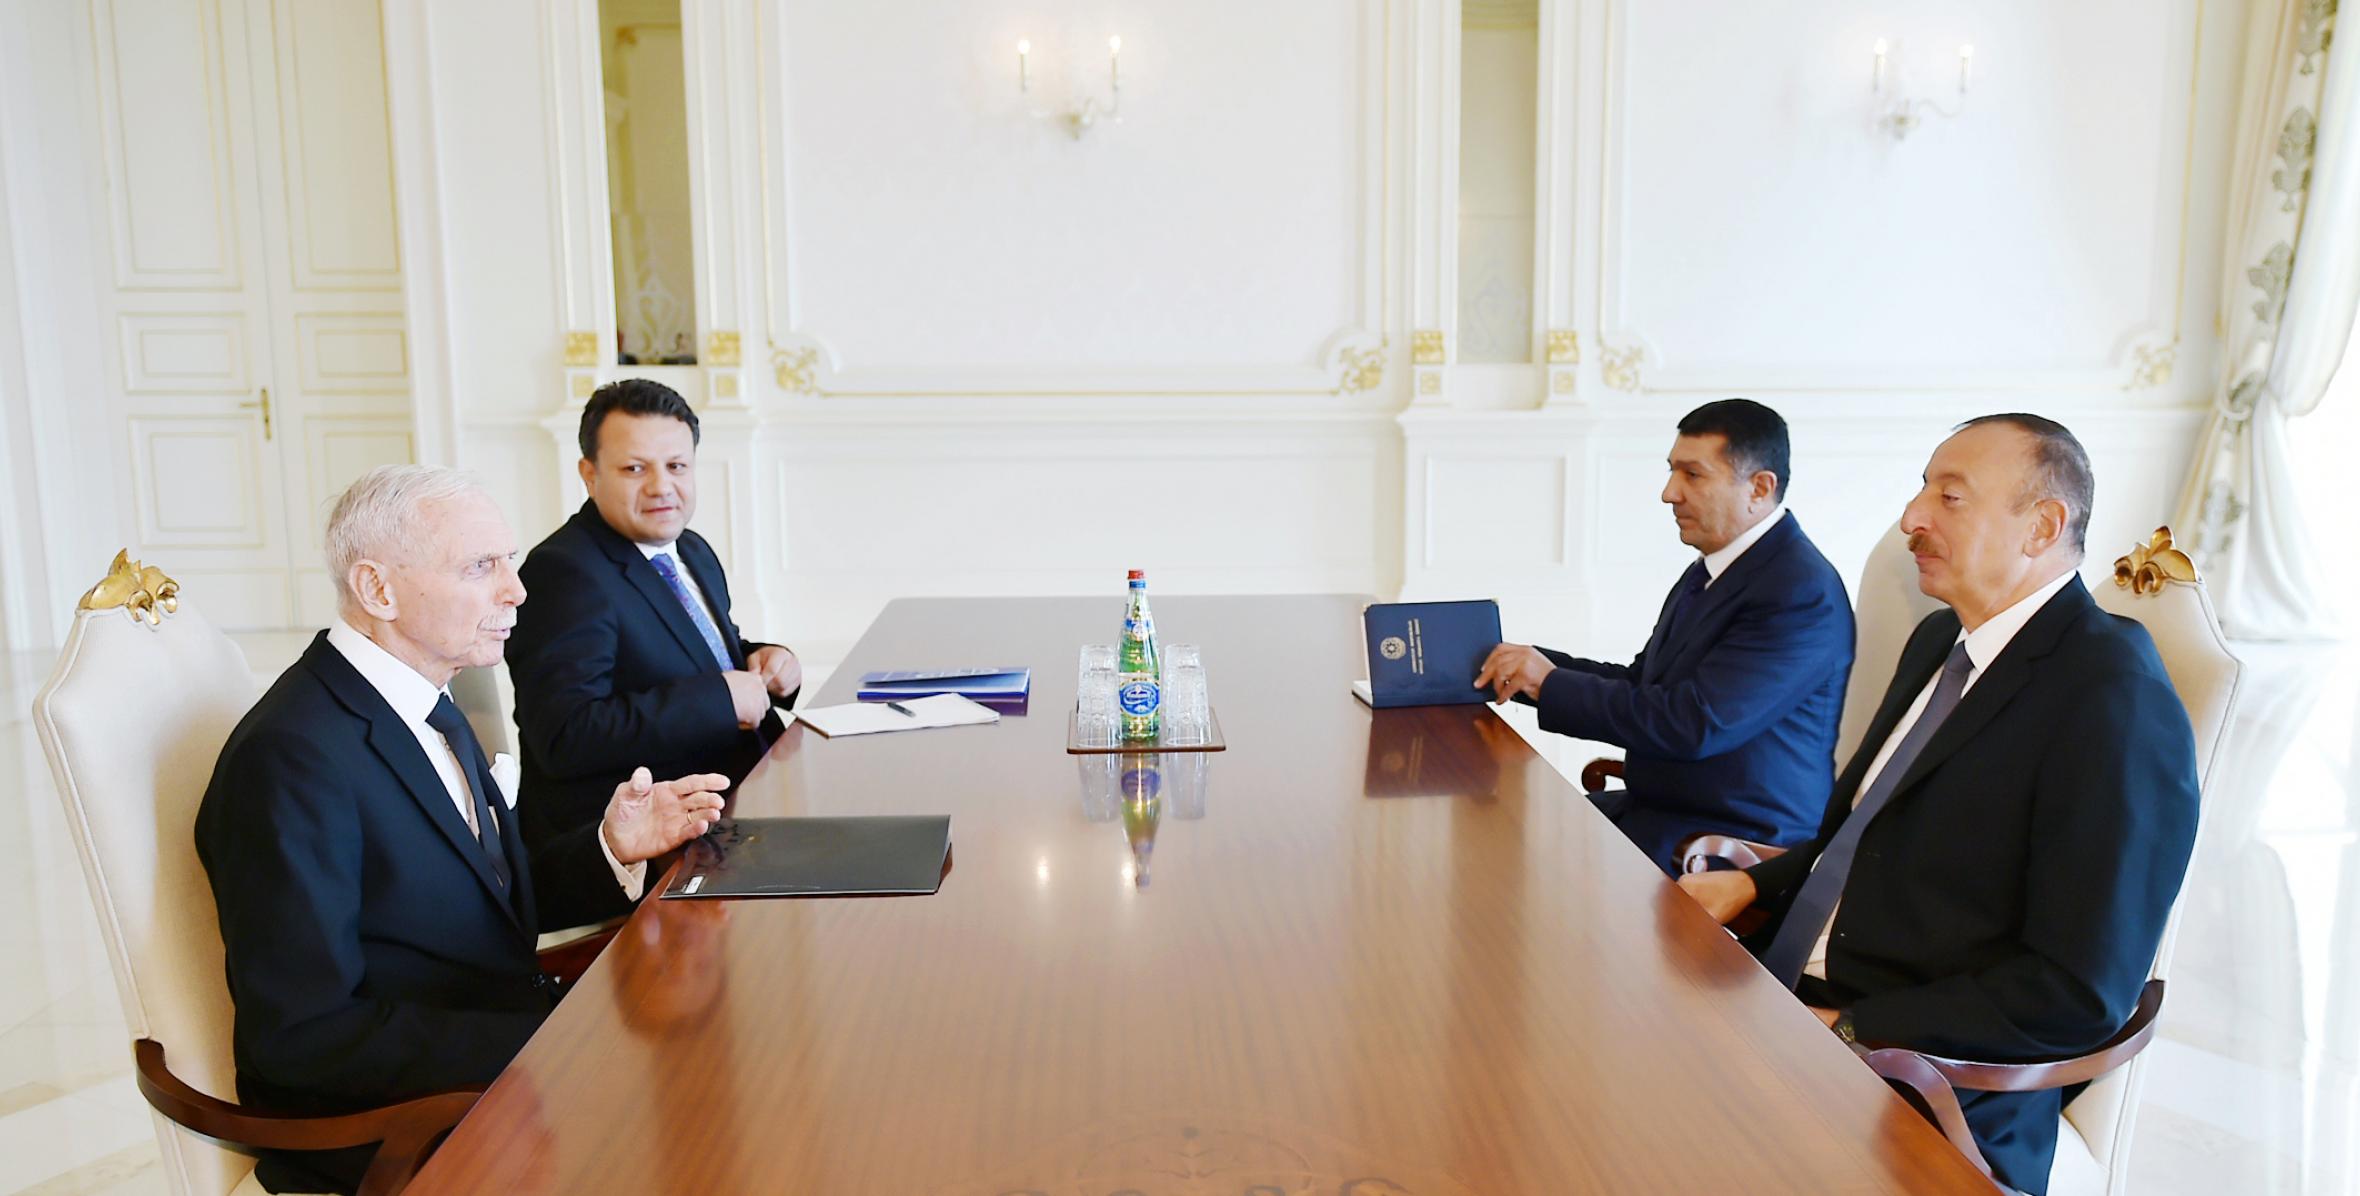 Ilham Aliyev received the Director General of the International Organization for Migration